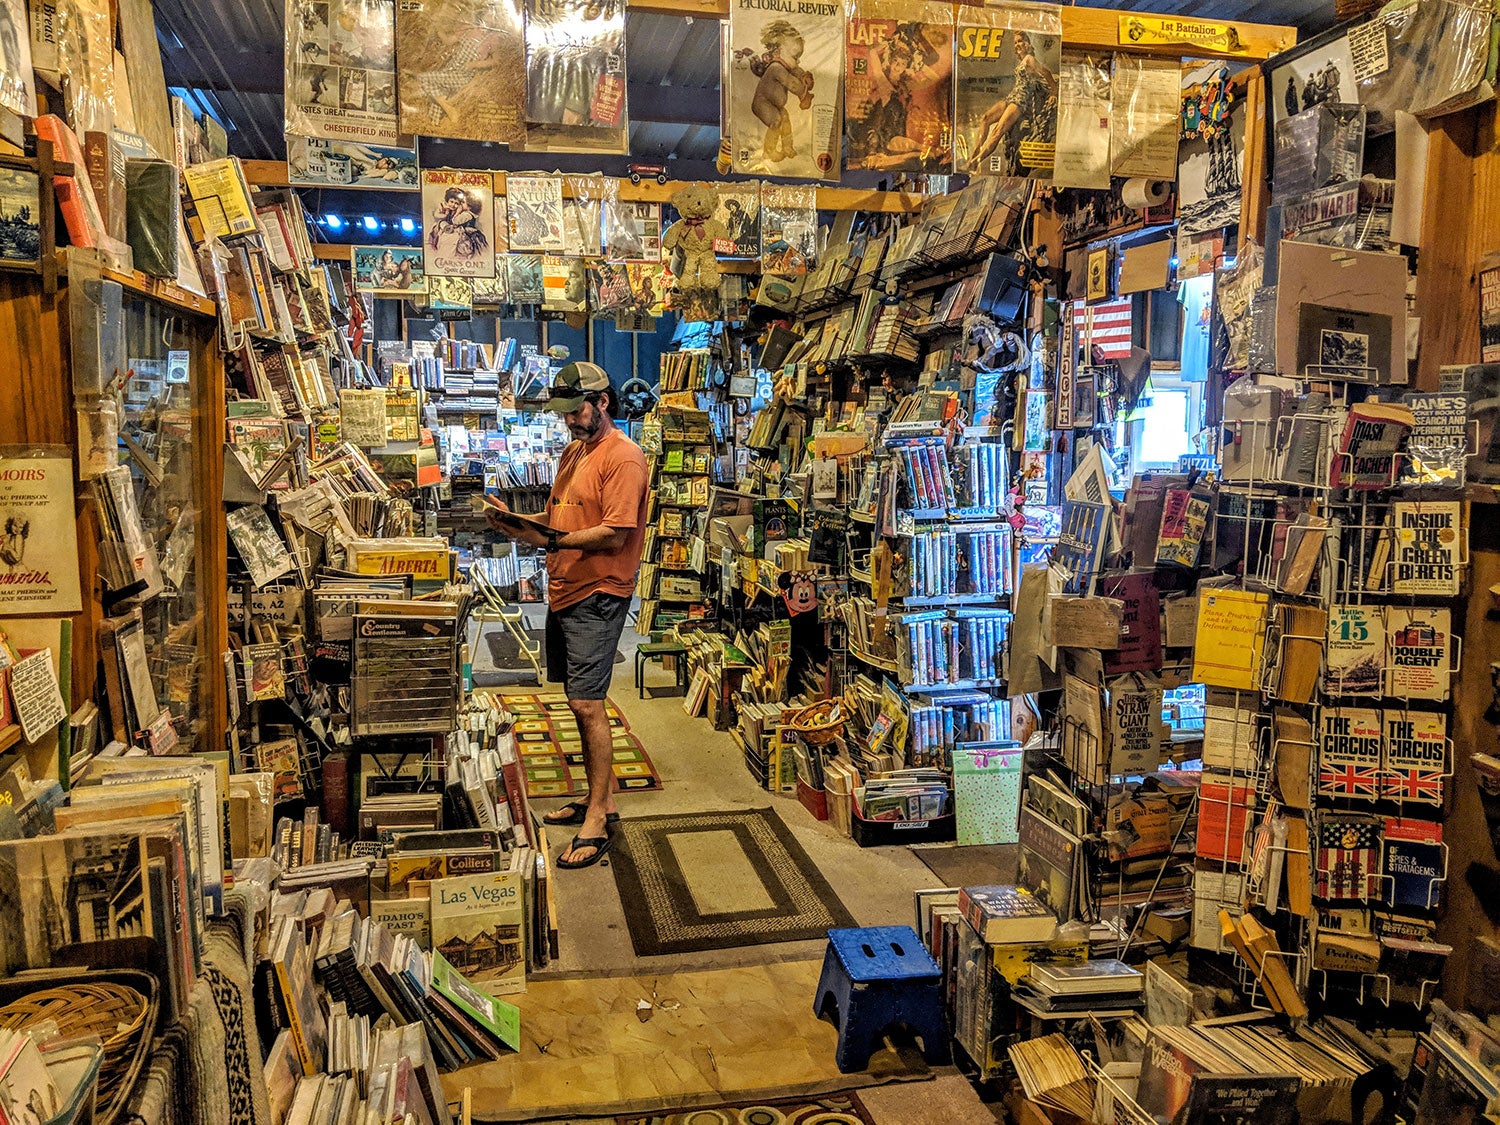 The interior of a book store in Quartzsite, AZ, with a man reading a book